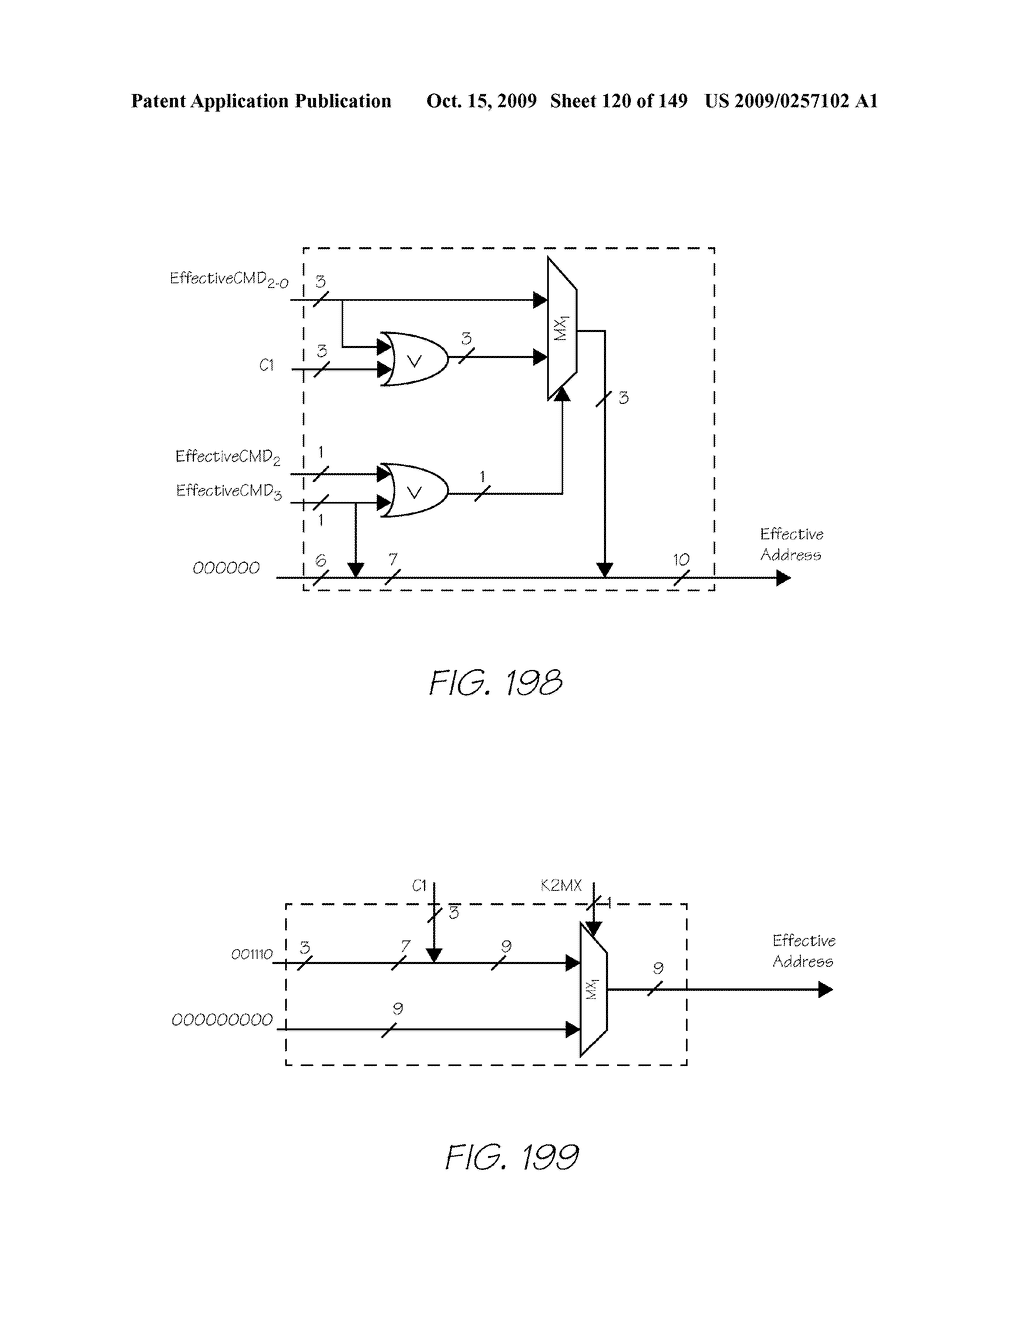 IMAGE PROCESSING APPARATUS HAVING CARD READER FOR APPLYING EFFECTS STORED ON A CARD TO A STORED IMAGE - diagram, schematic, and image 121